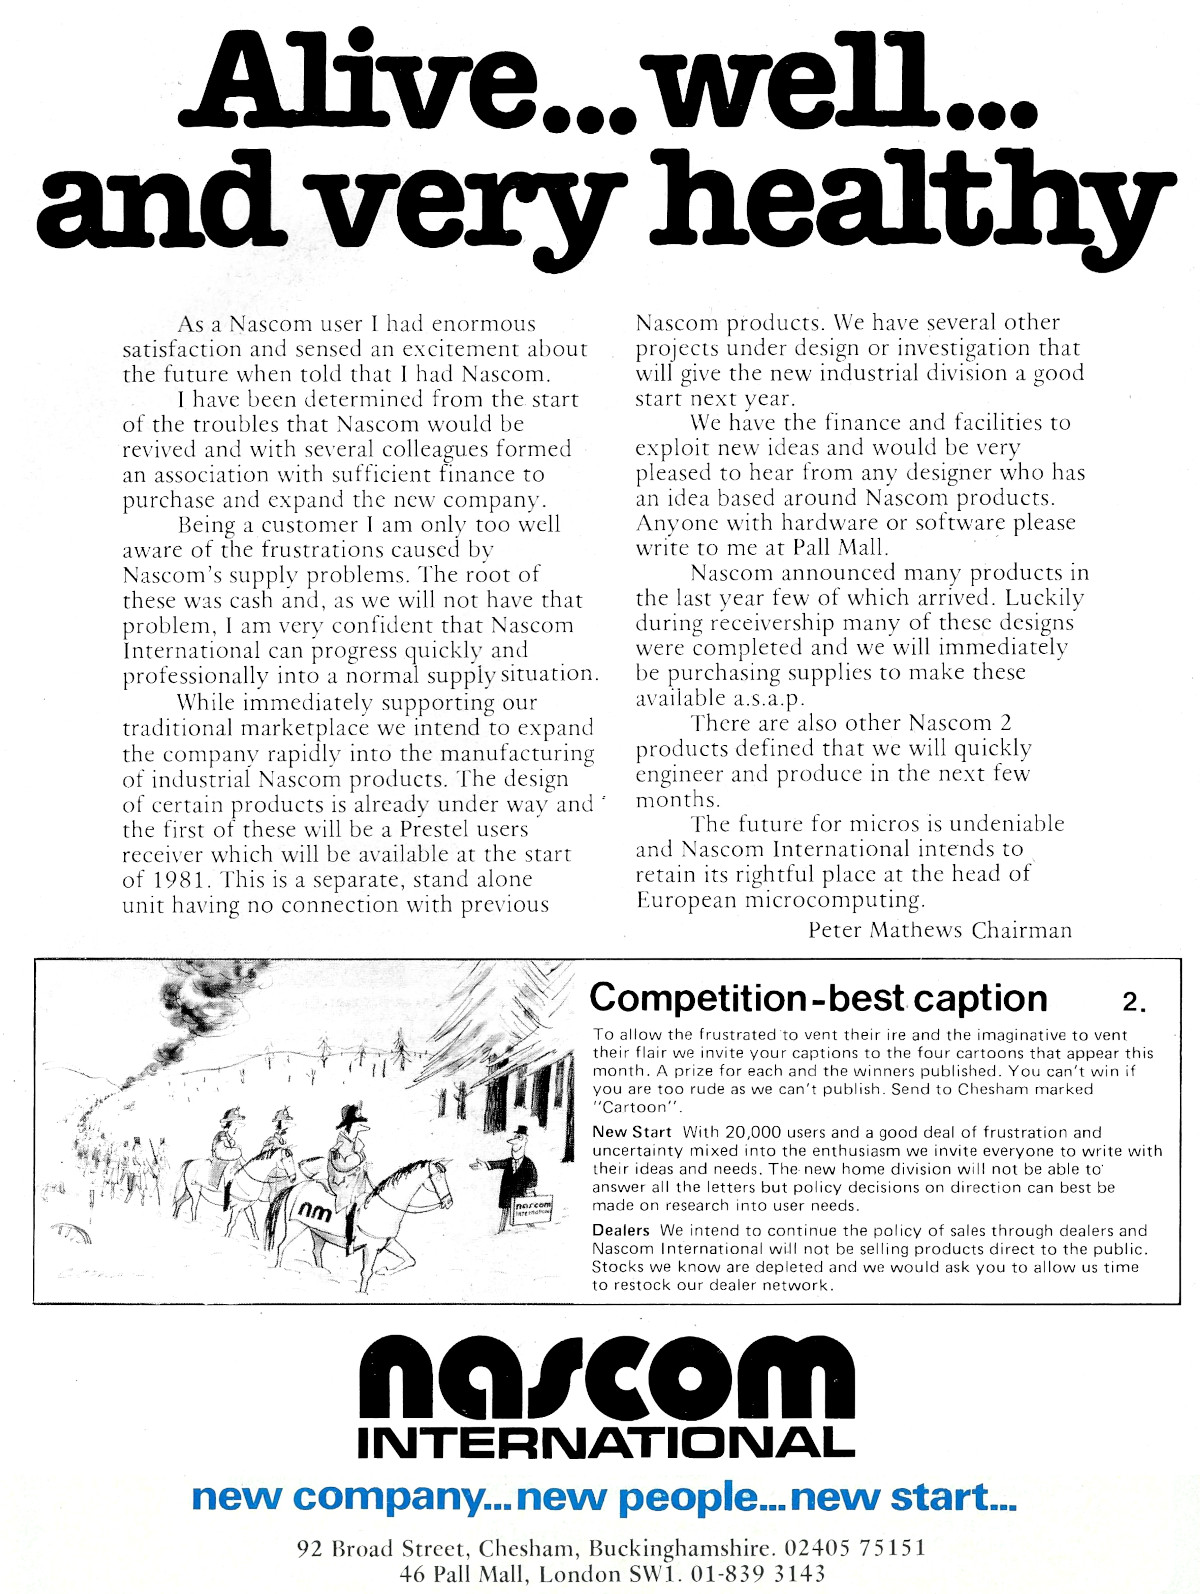 Nascom has a bit of a re-launch towards the end of 1980, with a slight rebrand to Nascom Internati<span class='hilite'>on</span>al.  From Pers<span class='hilite'>on</span>al Computer World, December 1980